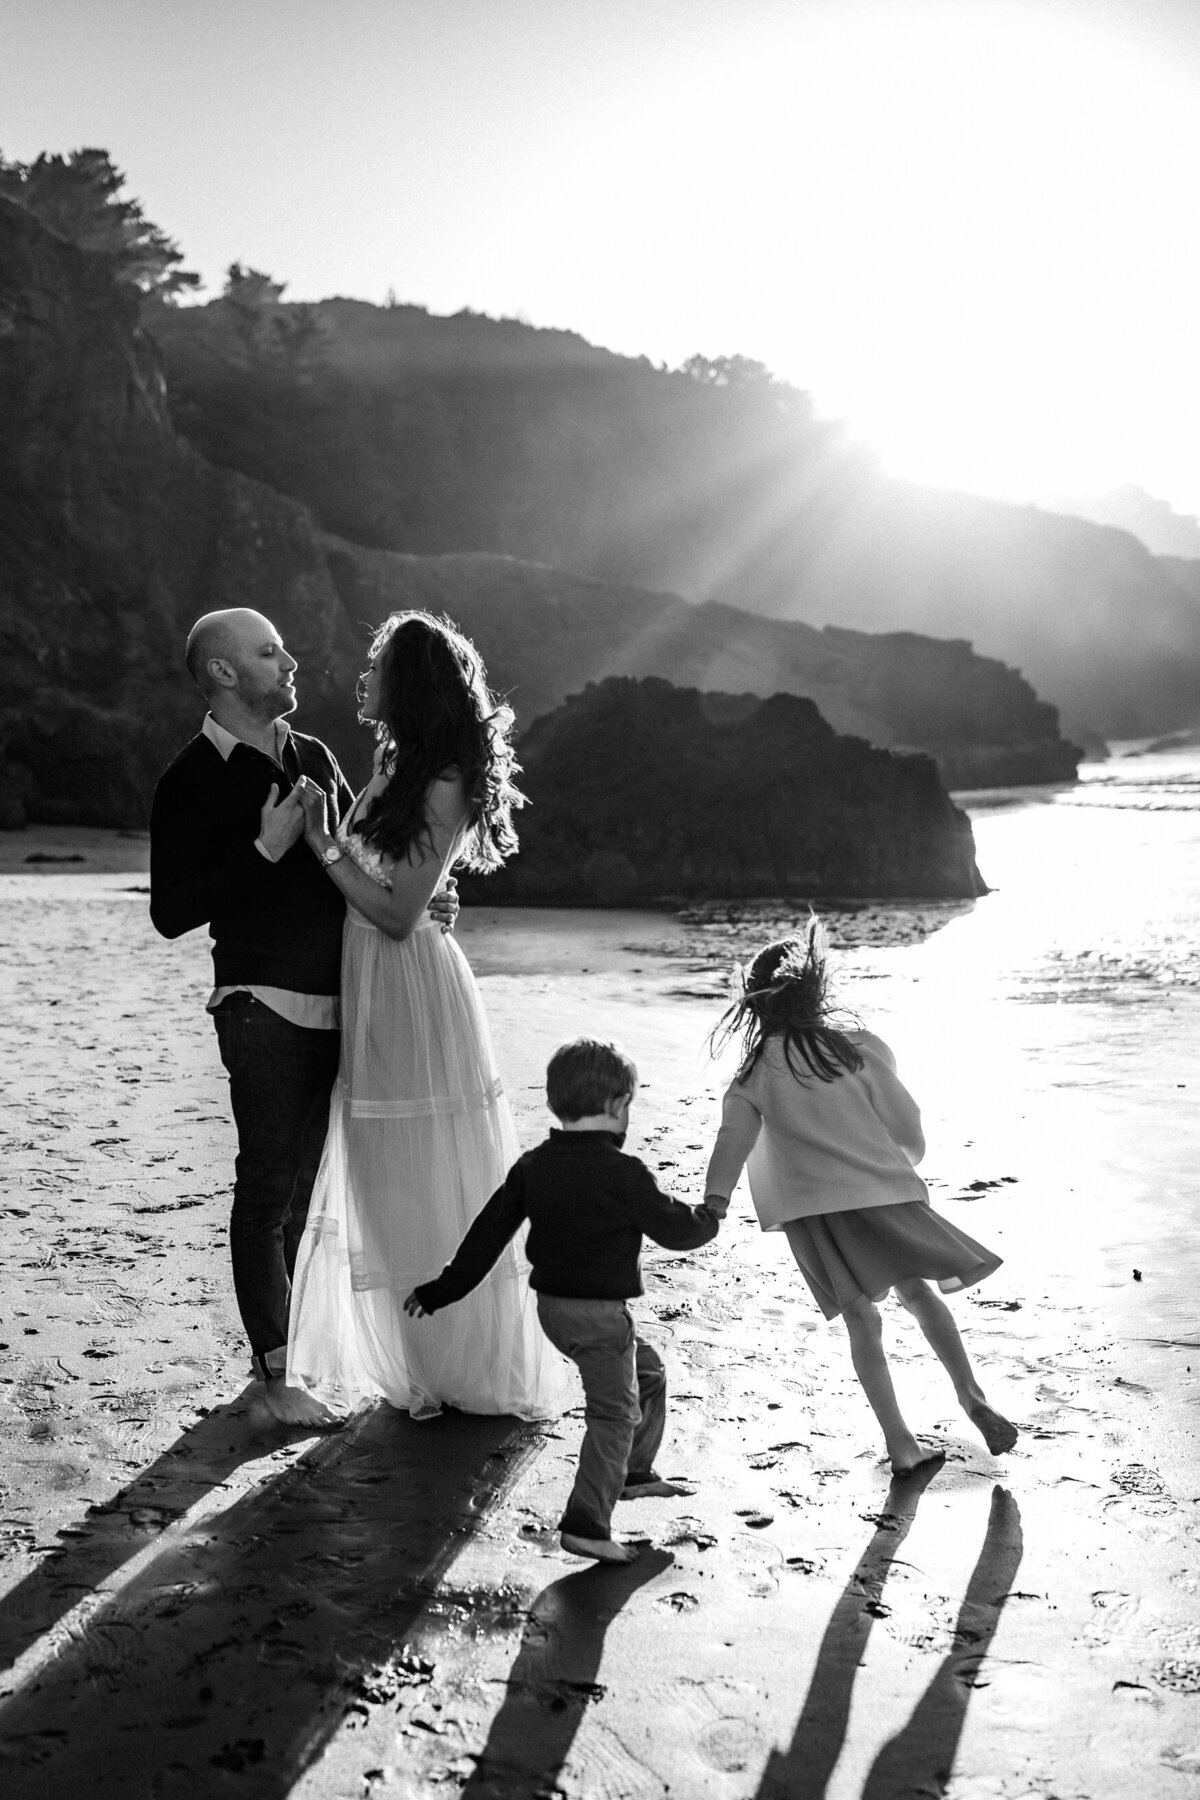 Bay Area family portrait on beach of parents embraced and children running